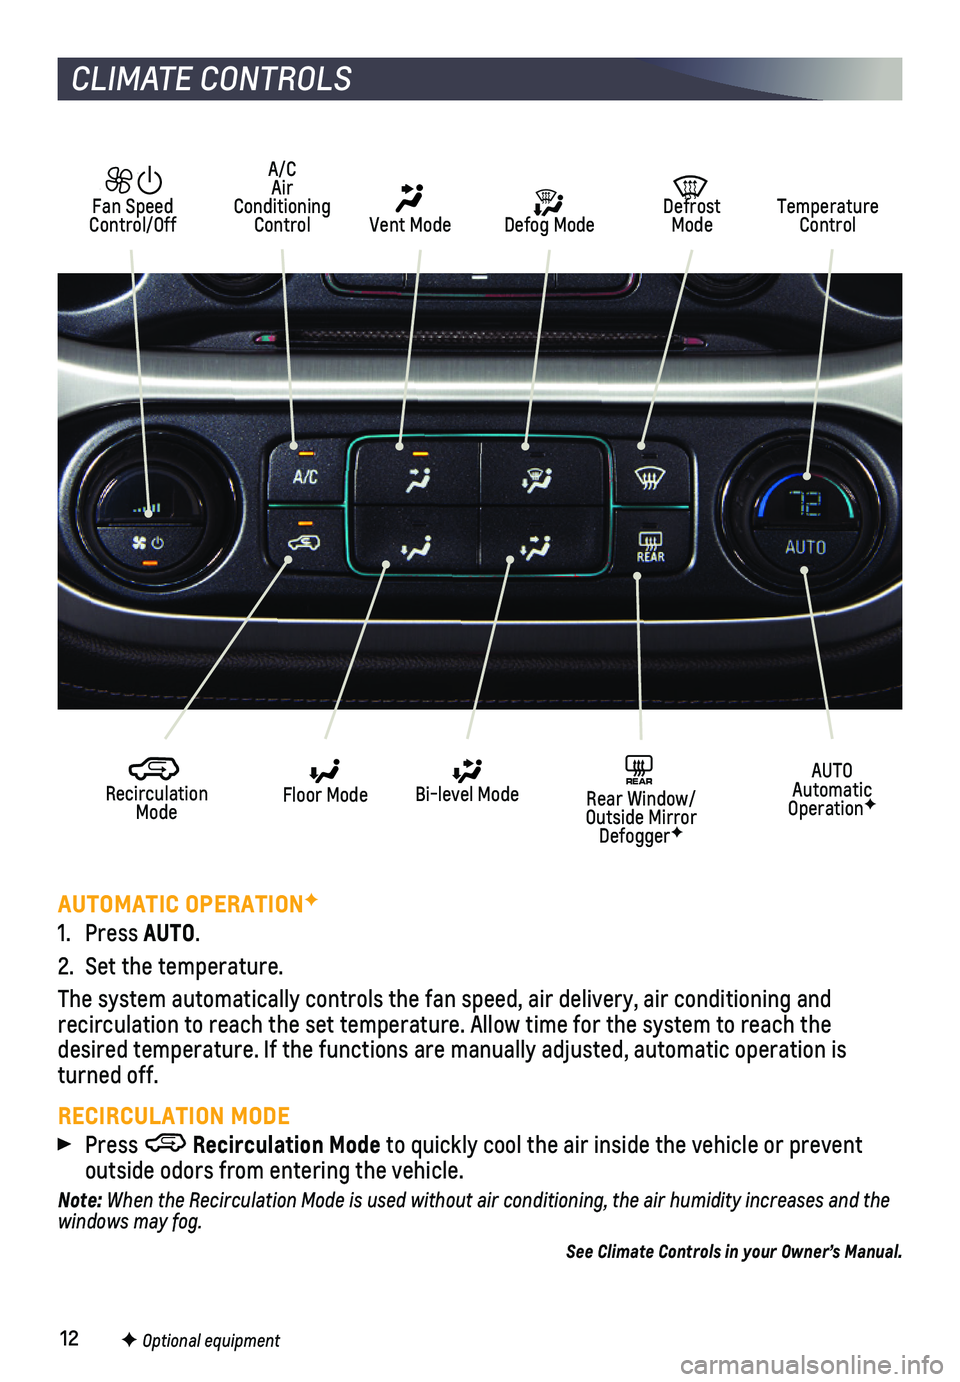 CHEVROLET COLORADO 2018  Get To Know Guide 12
CLIMATE CONTROLS
AUTOMATIC OPERATIONF
1. Press AUTO.
2. Set the temperature. 
The system automatically controls the fan speed, air delivery, air condi\
tioning and  
recirculation to reach the set 